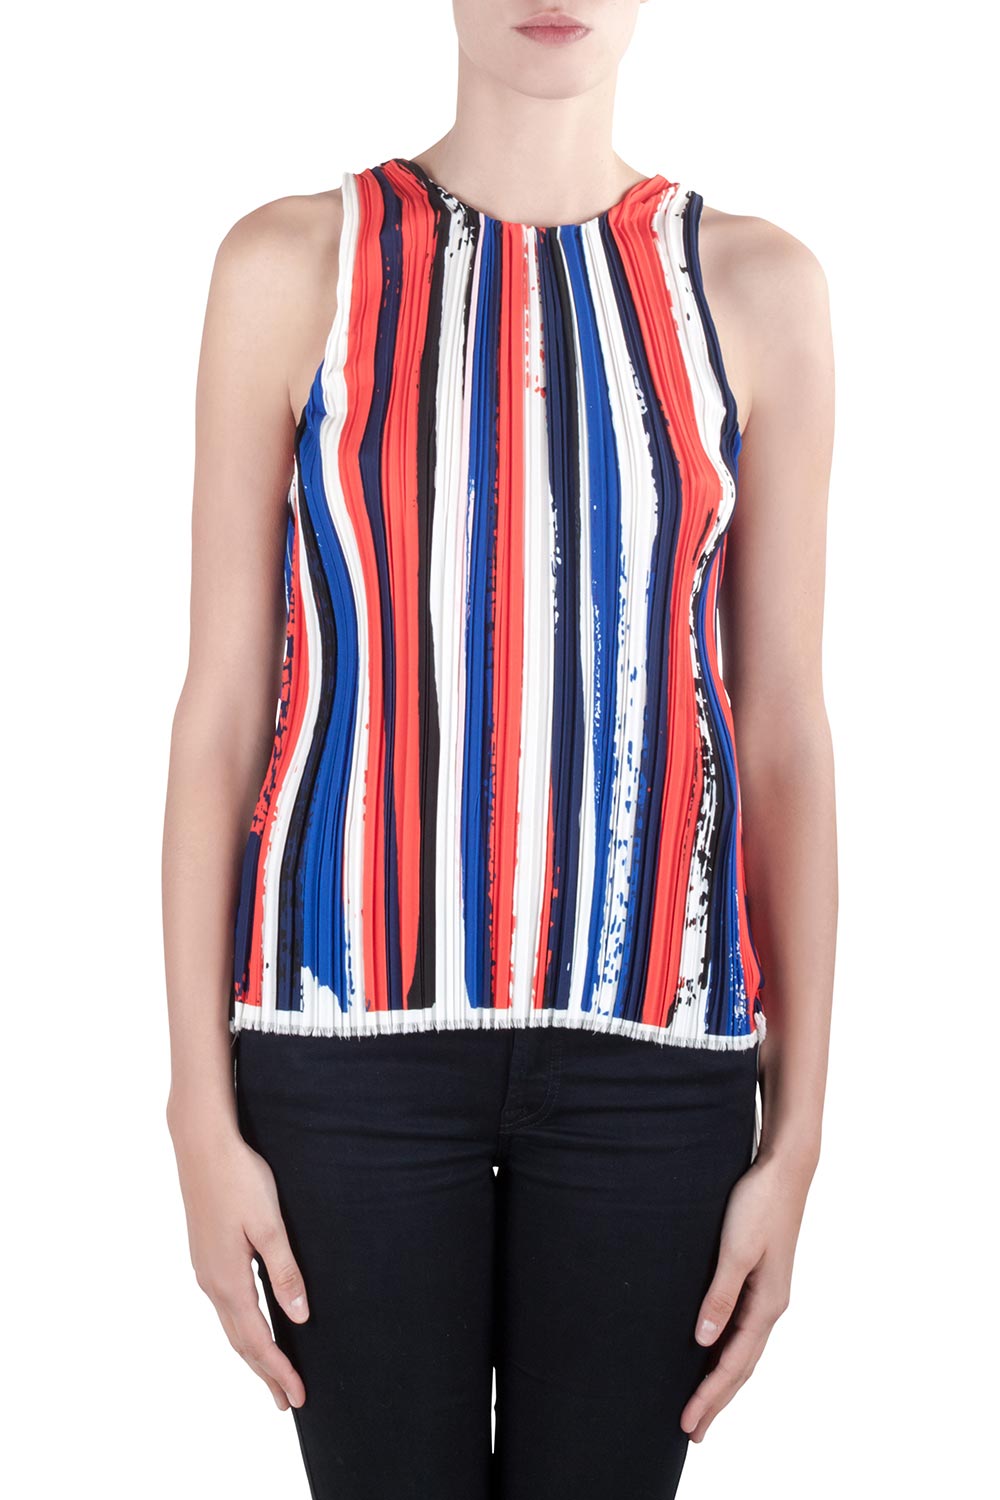 Dion Lee II Multicolor Plisse Striped Knit Sleeveless Top M